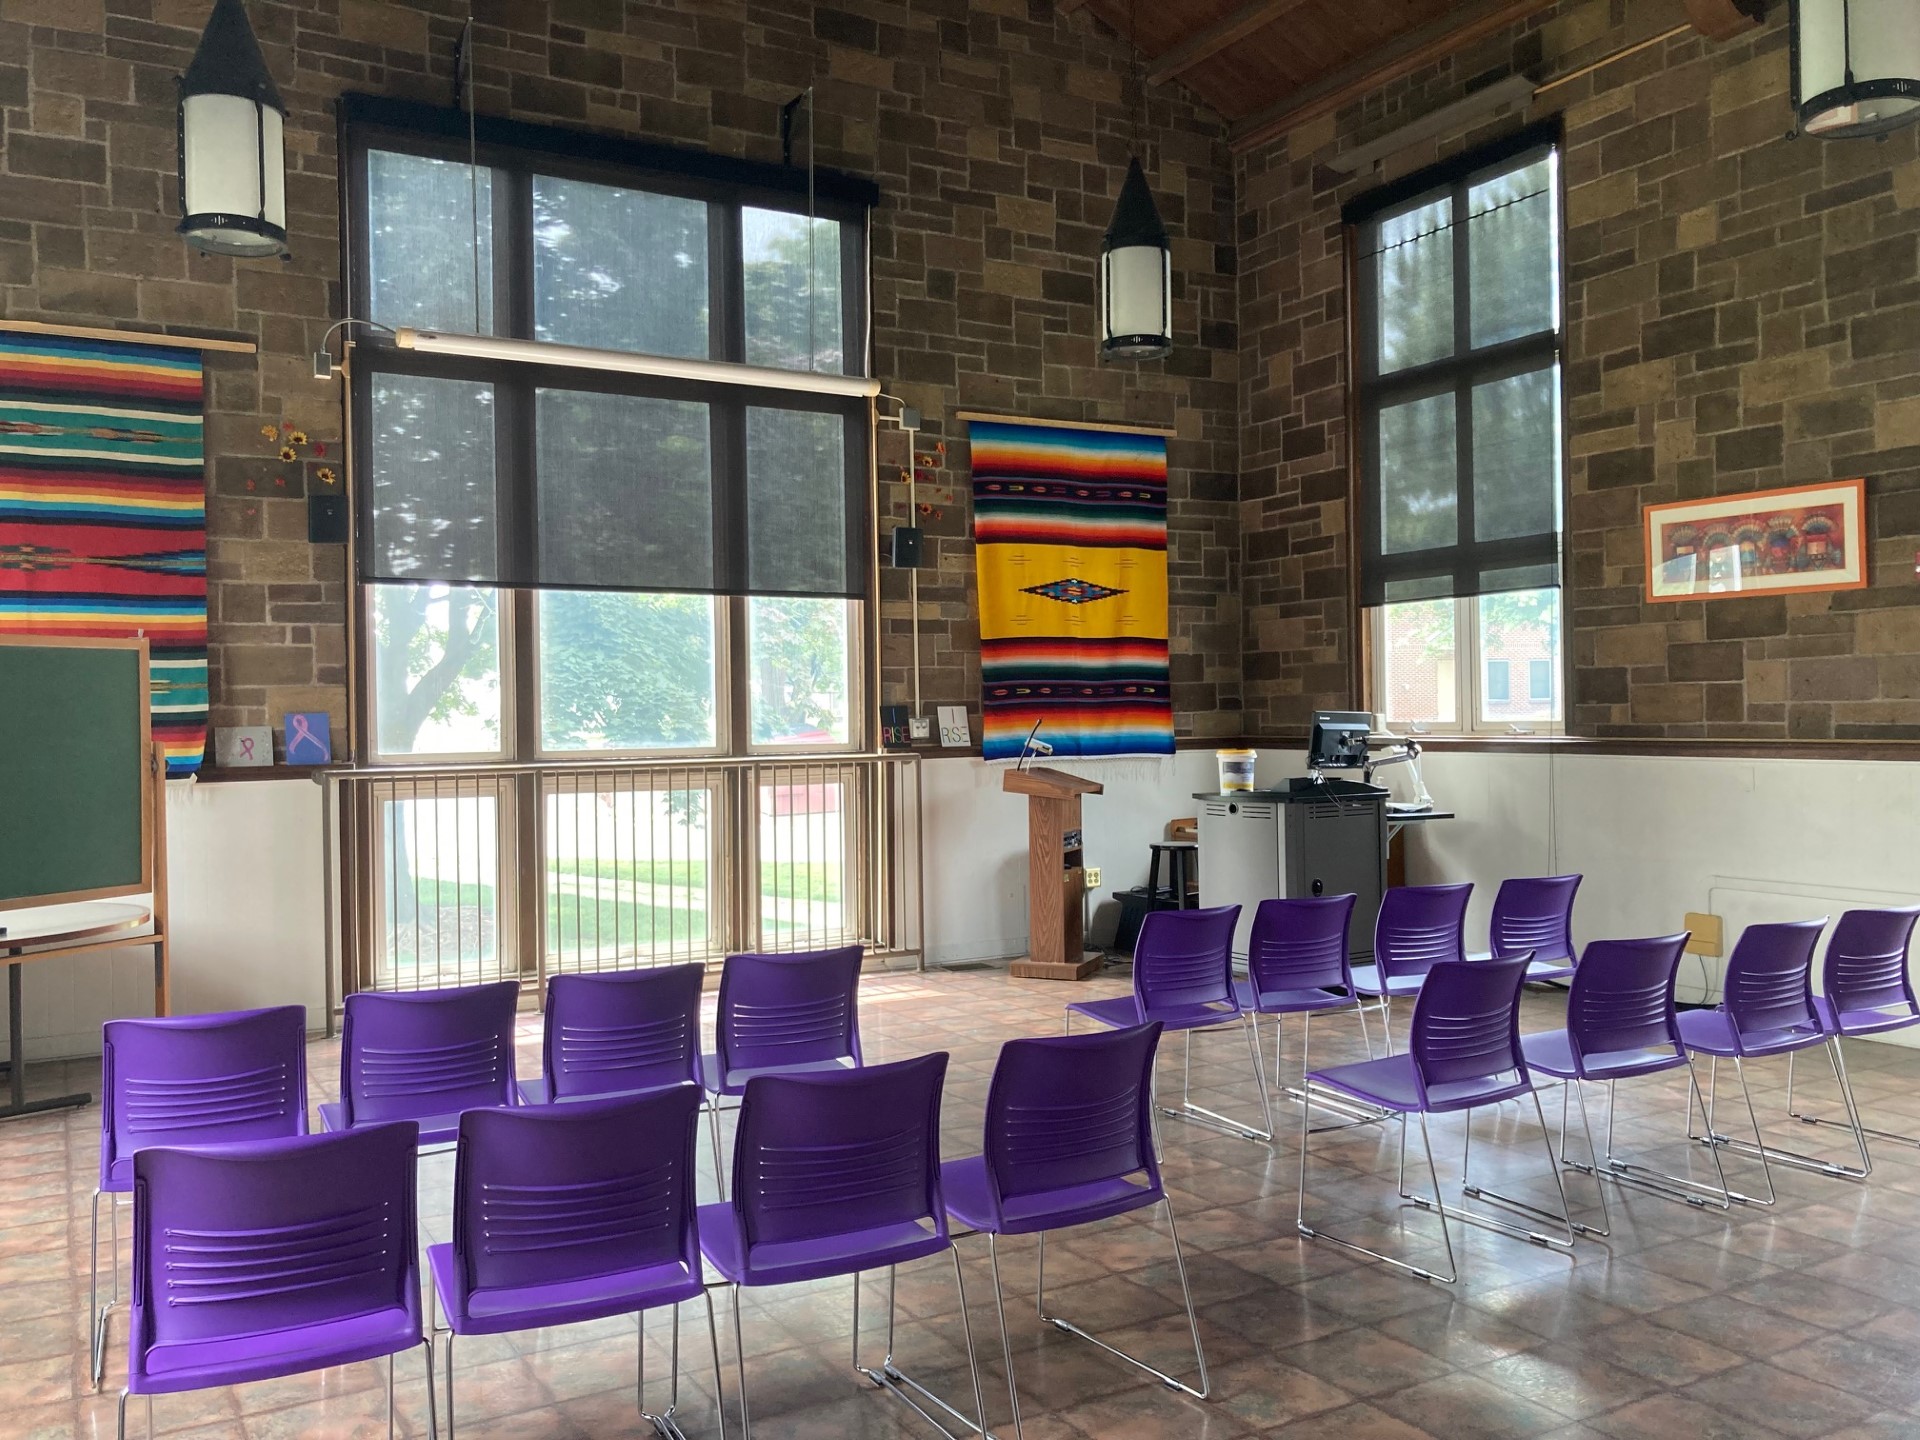 purple chairs in high-ceilinged room with natural light